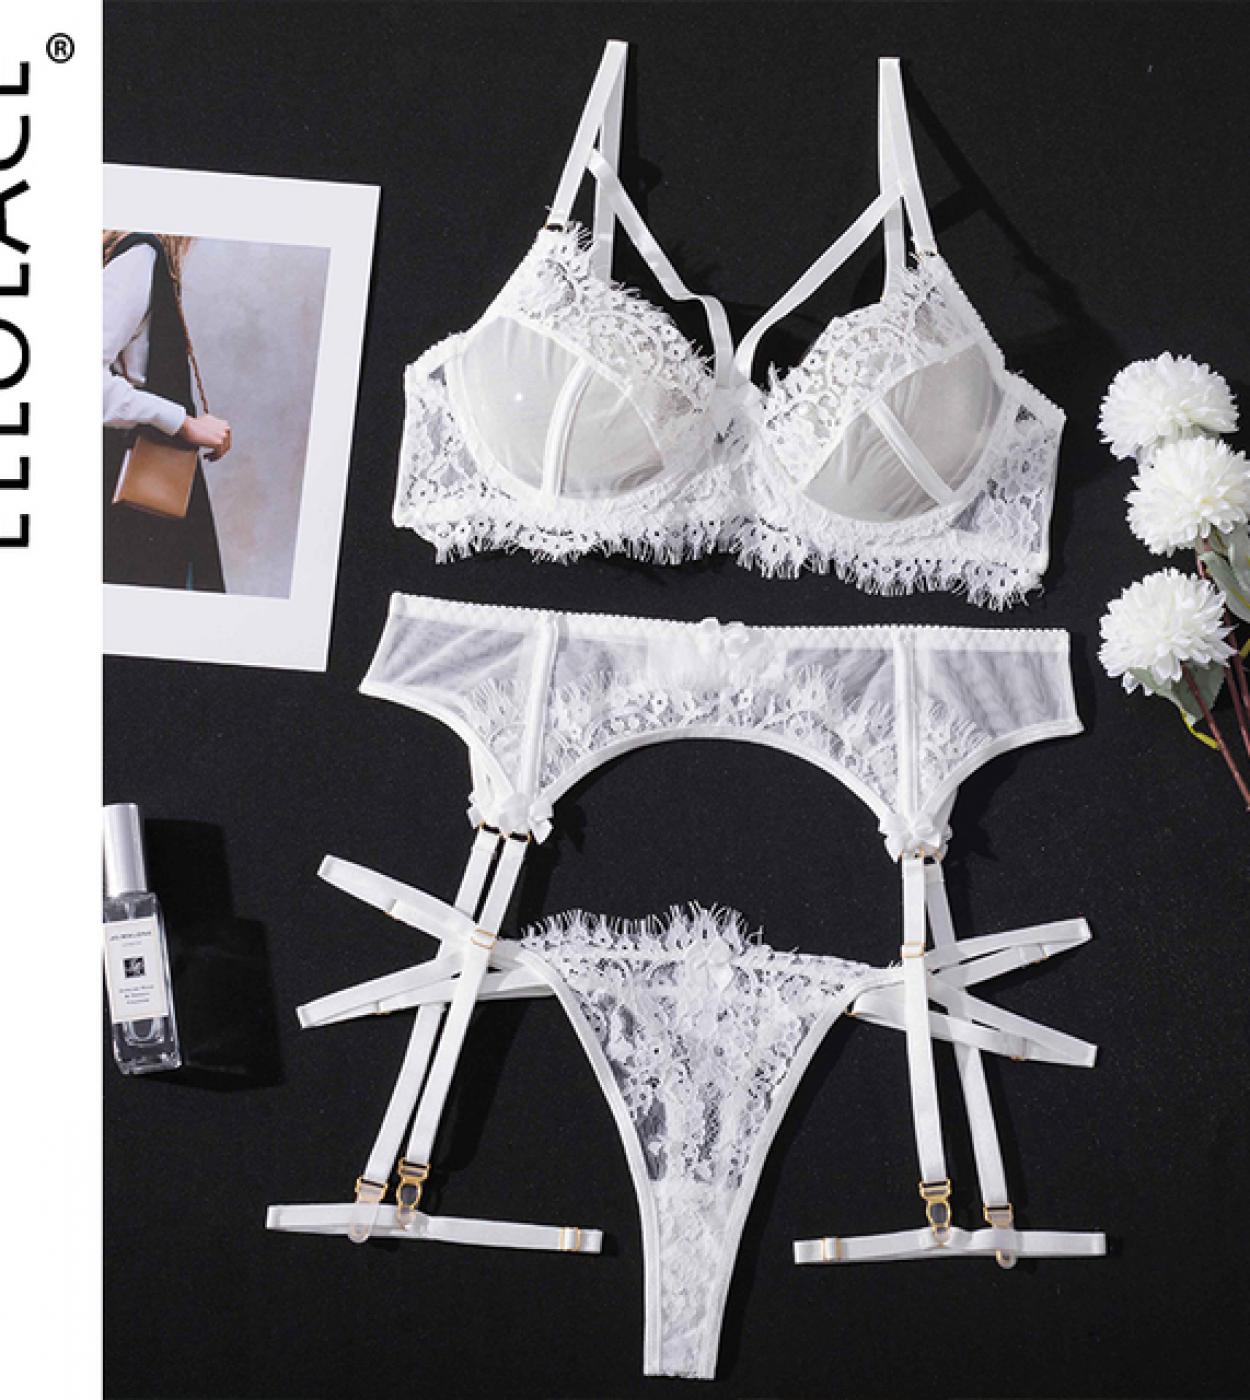 Topshop Clara lace lingerie set in white